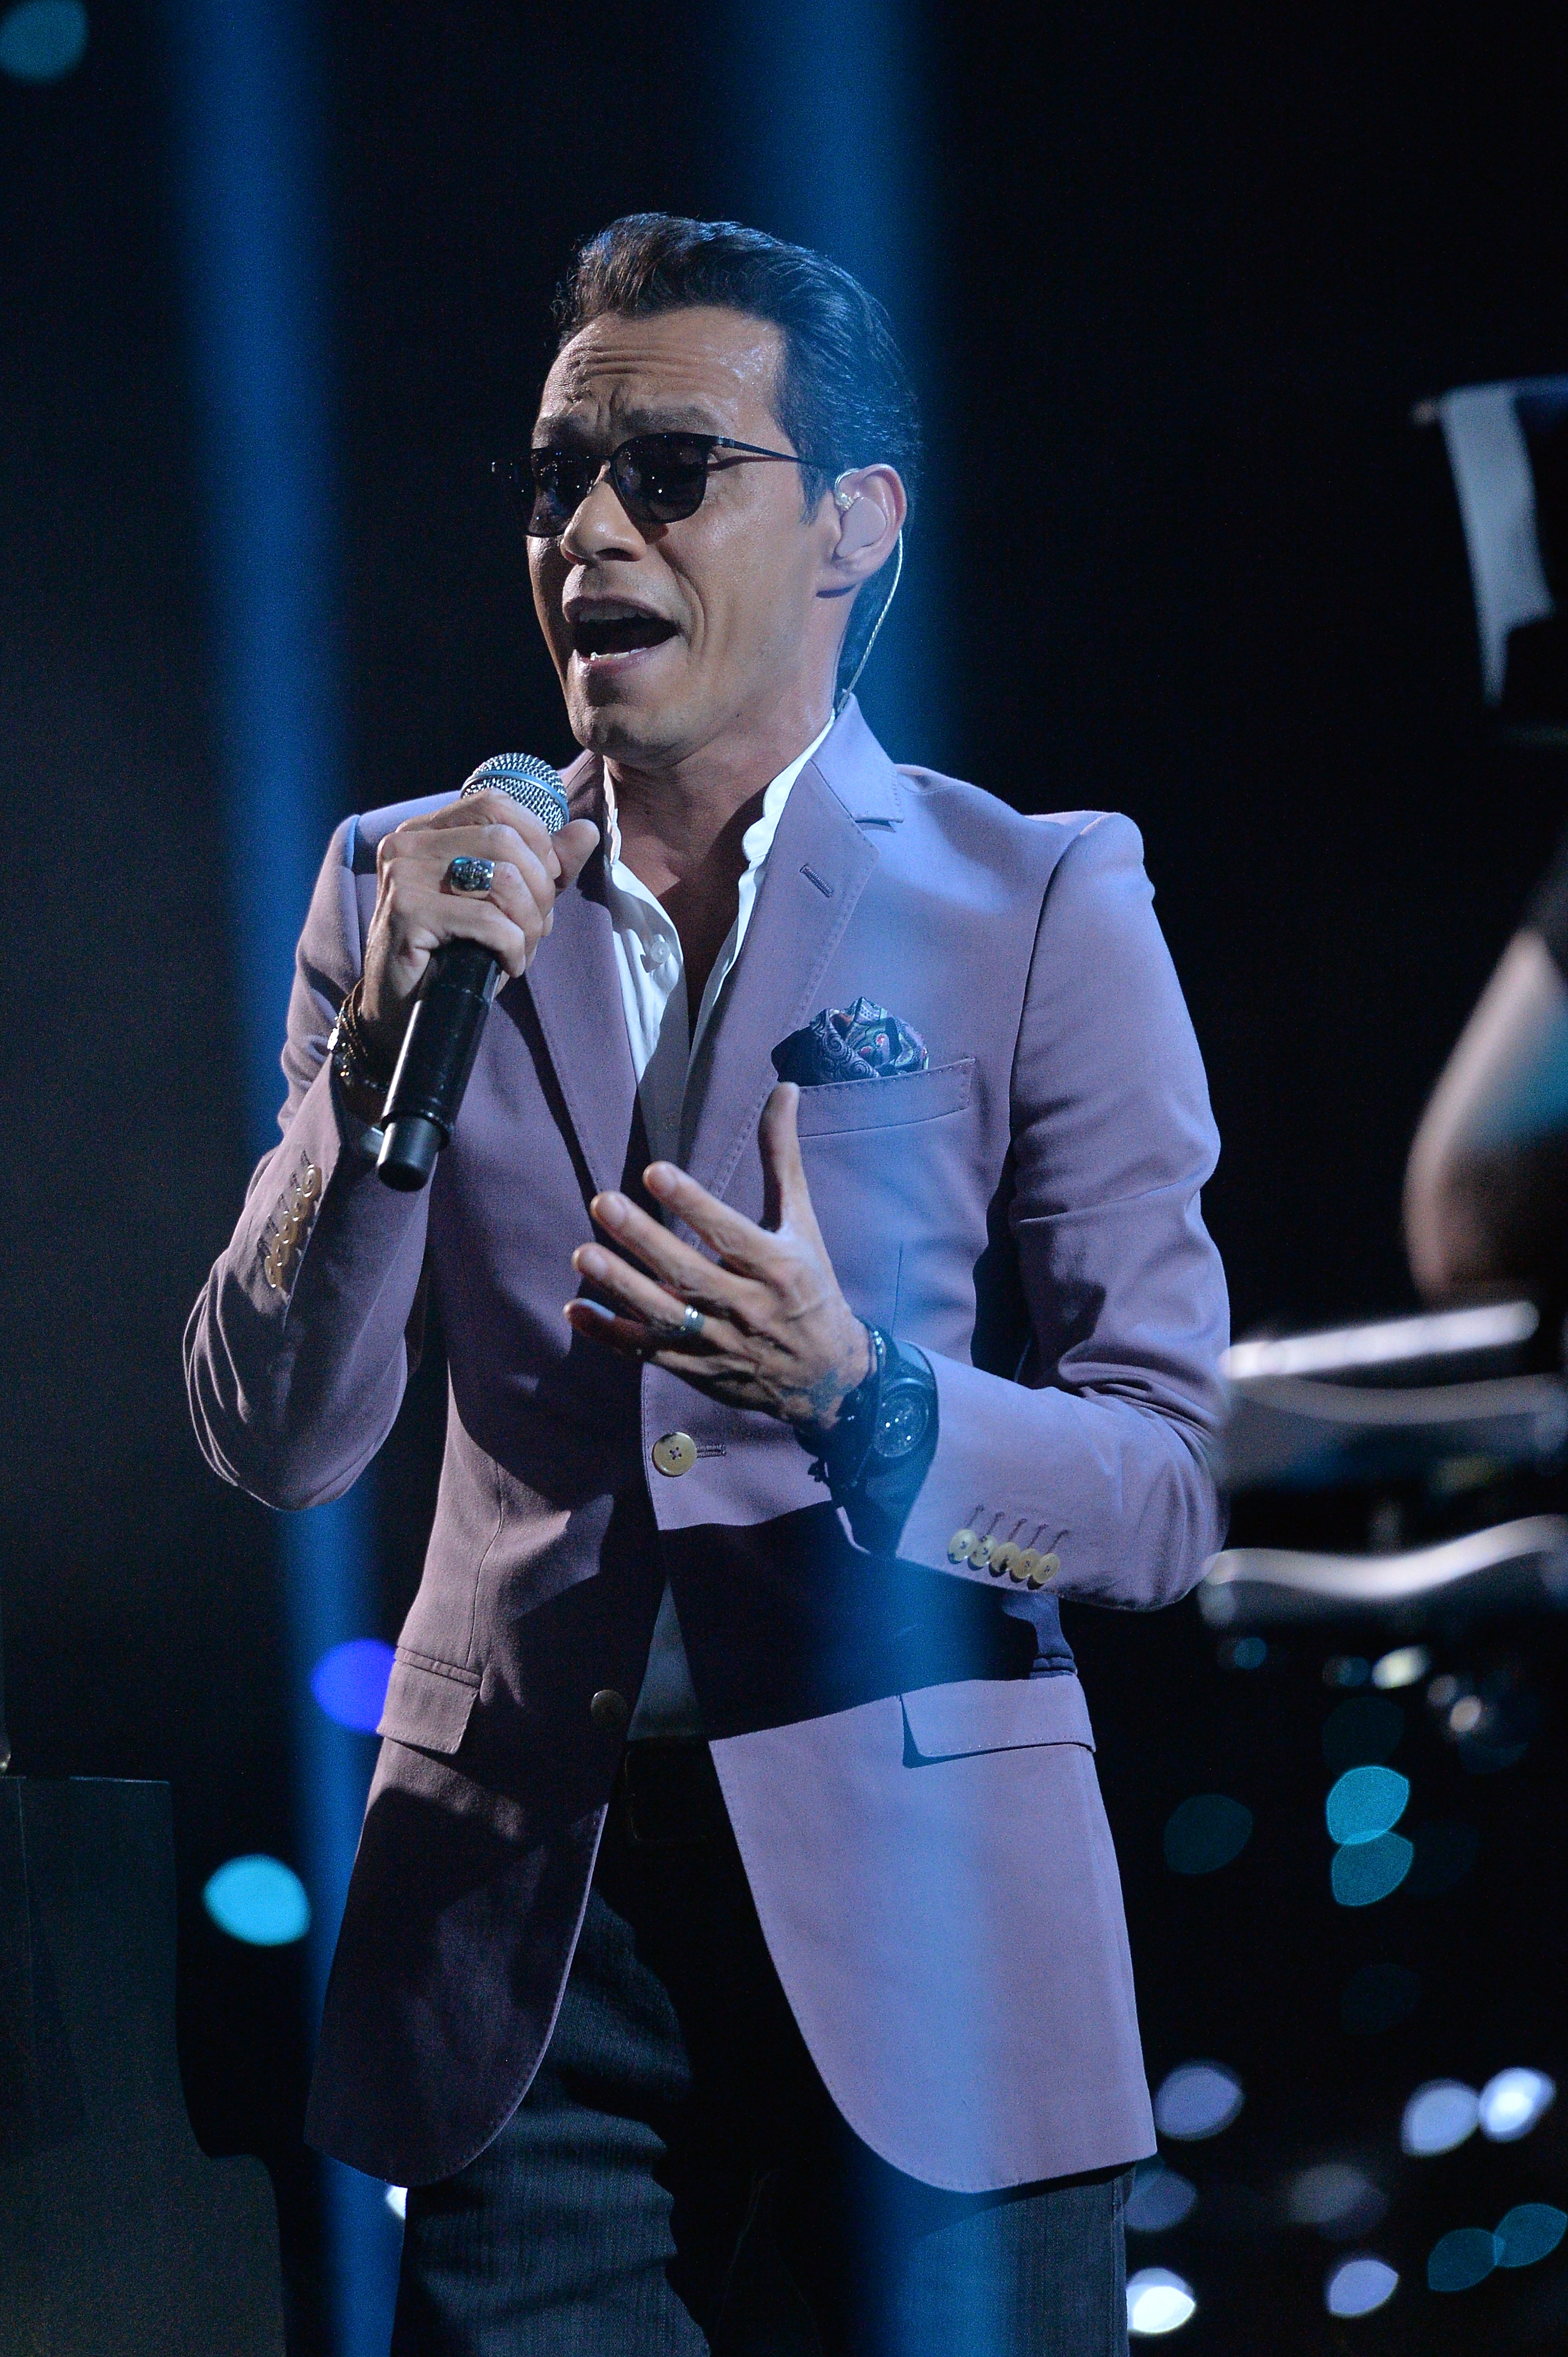 MIAMI, FL - JULY 14: Marc Anthony performs onstage at the Univision's 13th Edition Of Premios Juventud Youth Awards at Bank United Center on July 14, 2016 in Miami, Florida. Rodrigo Varela/Getty Images for Univision/AFP